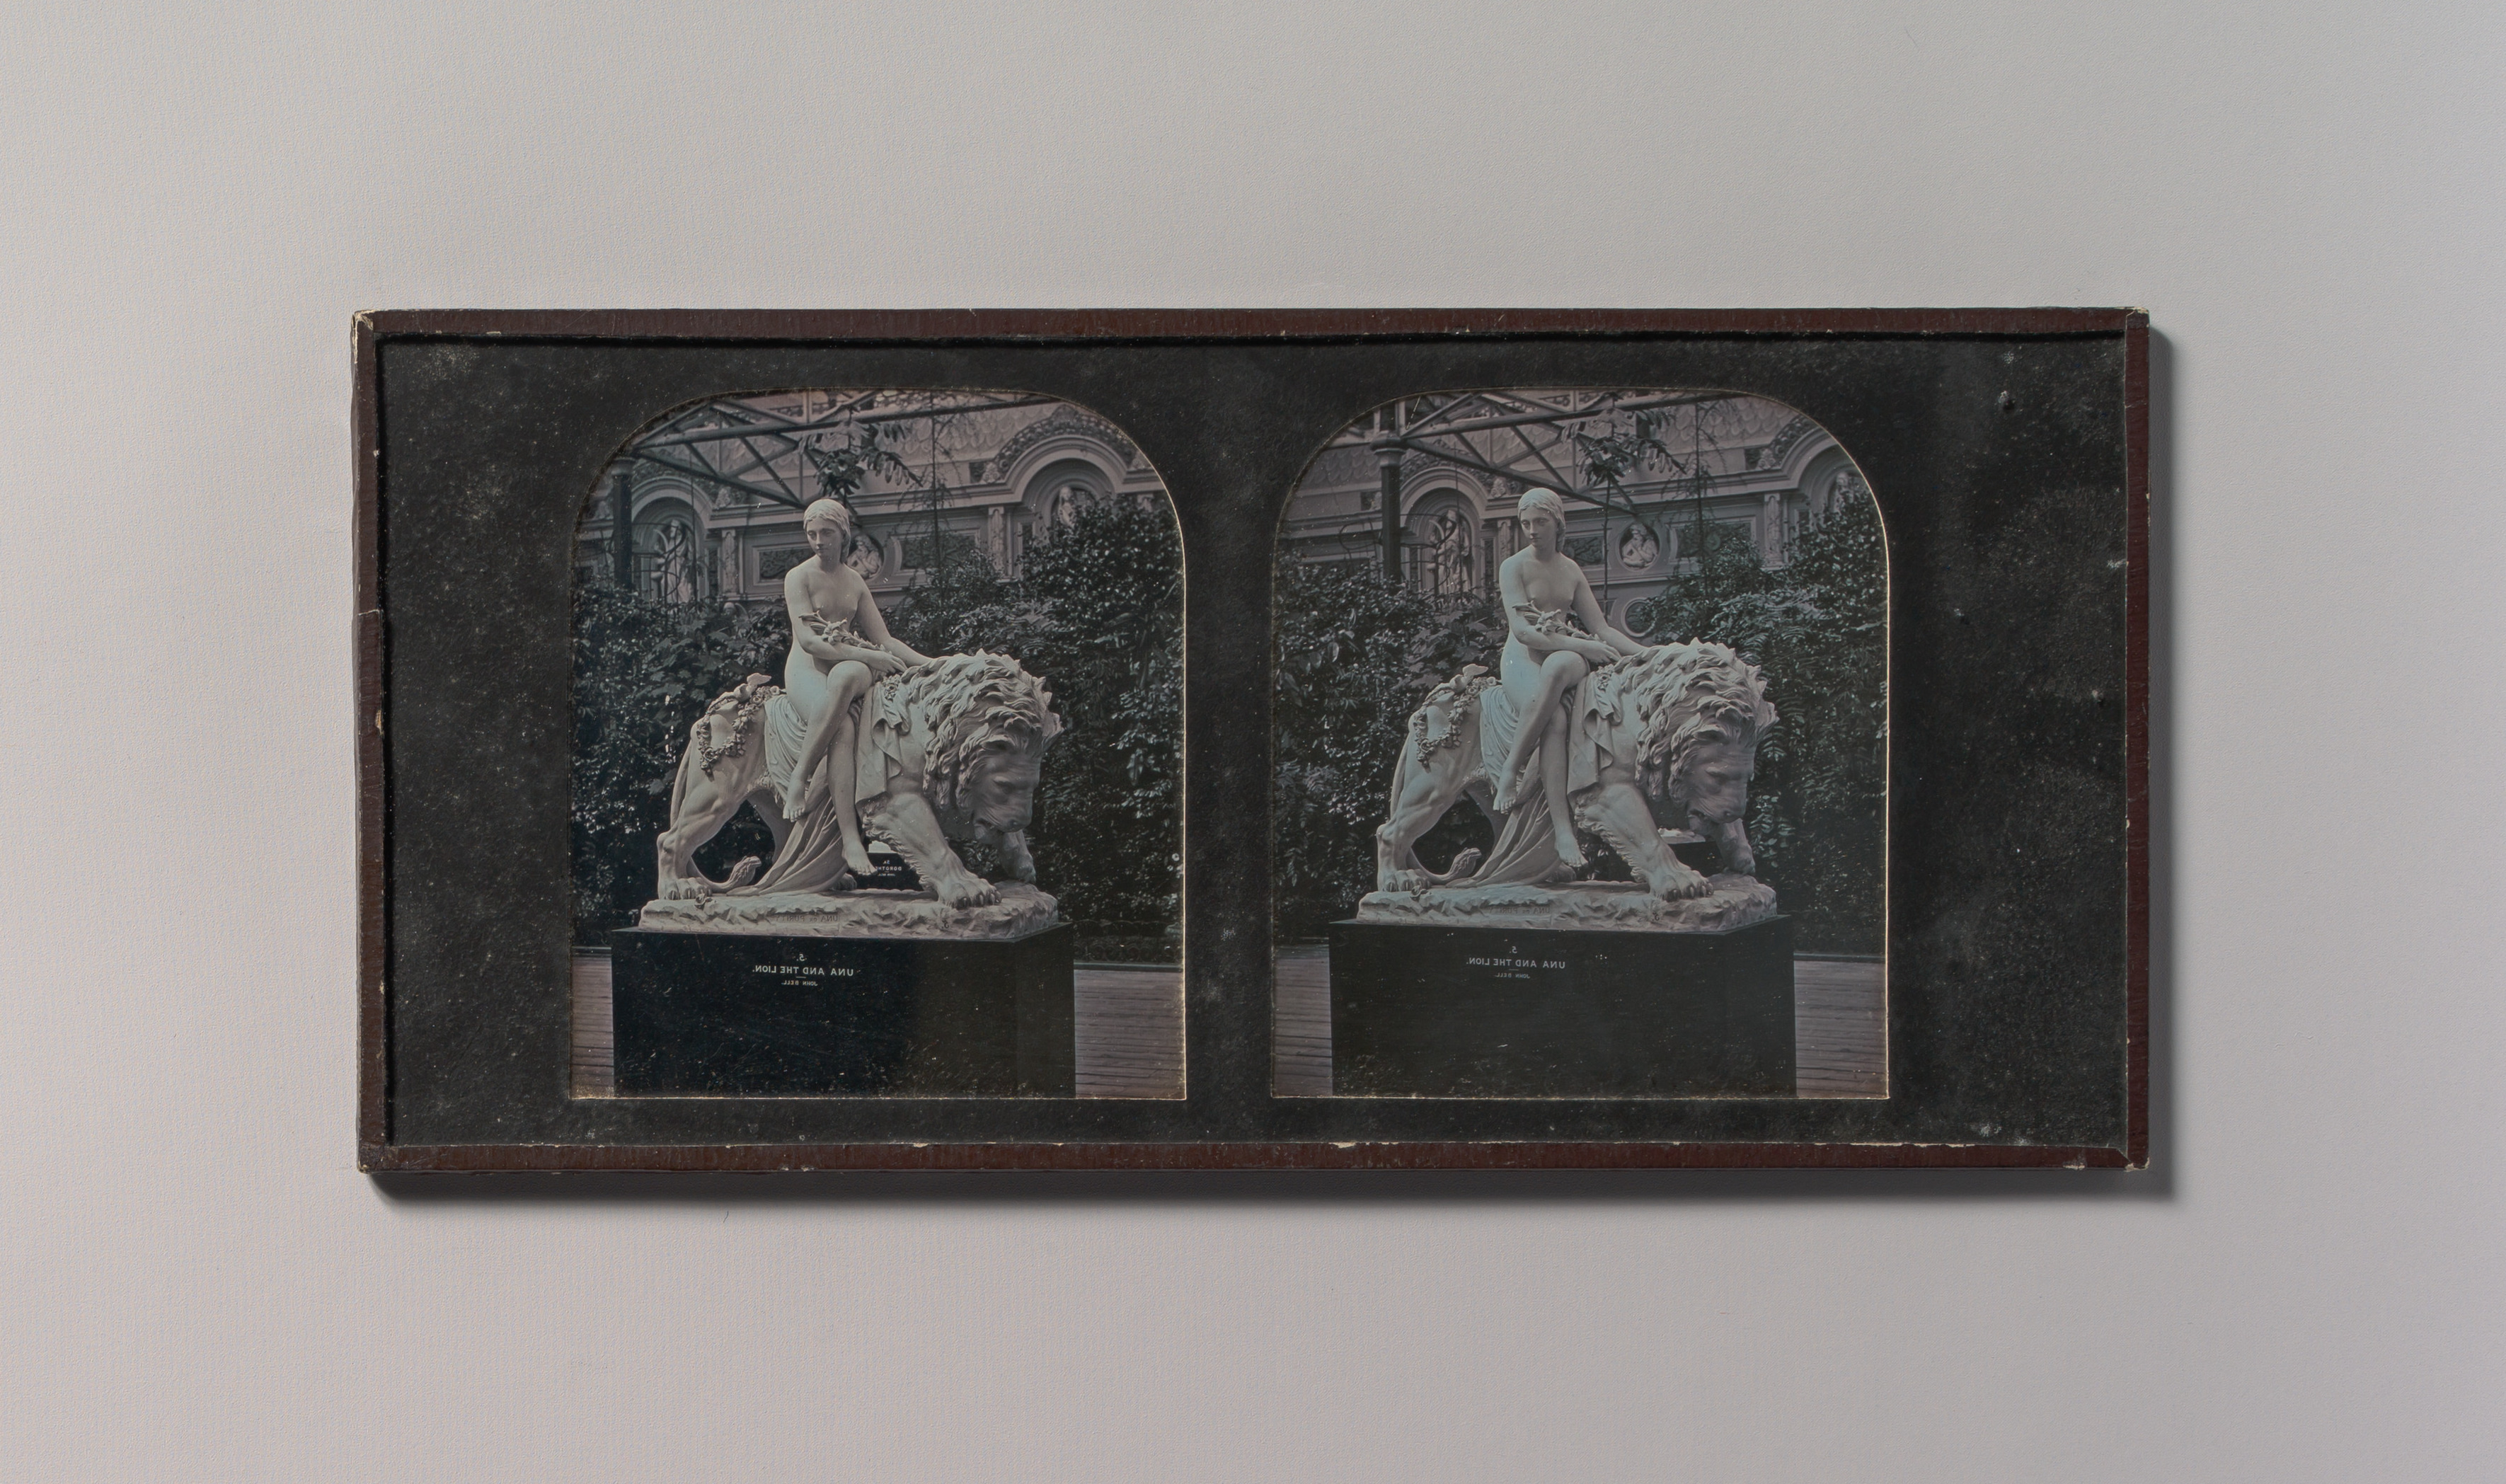 [Stereograph, Crystal Palace, John Bell's Una and the Lion], London Stereoscopic Company (British), Daguerreotype